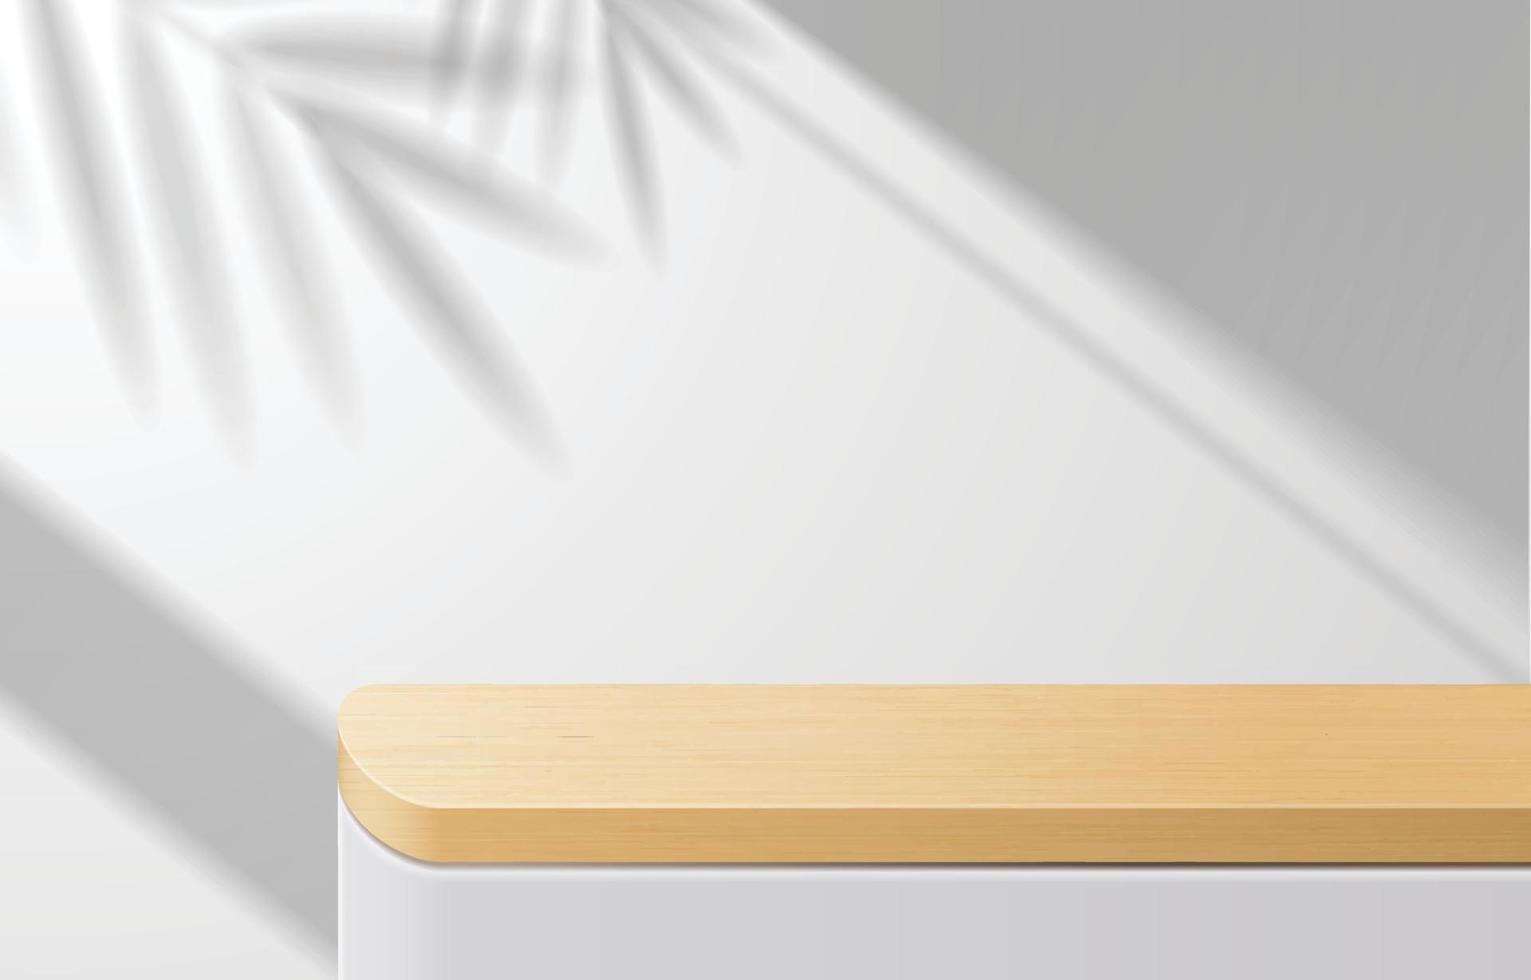 Empty minimal wooden top table, wood podium in white background with shadow leaves. for product presentation, mock up, show cosmetic product display, Podium, stage pedestal or platform. 3d vector